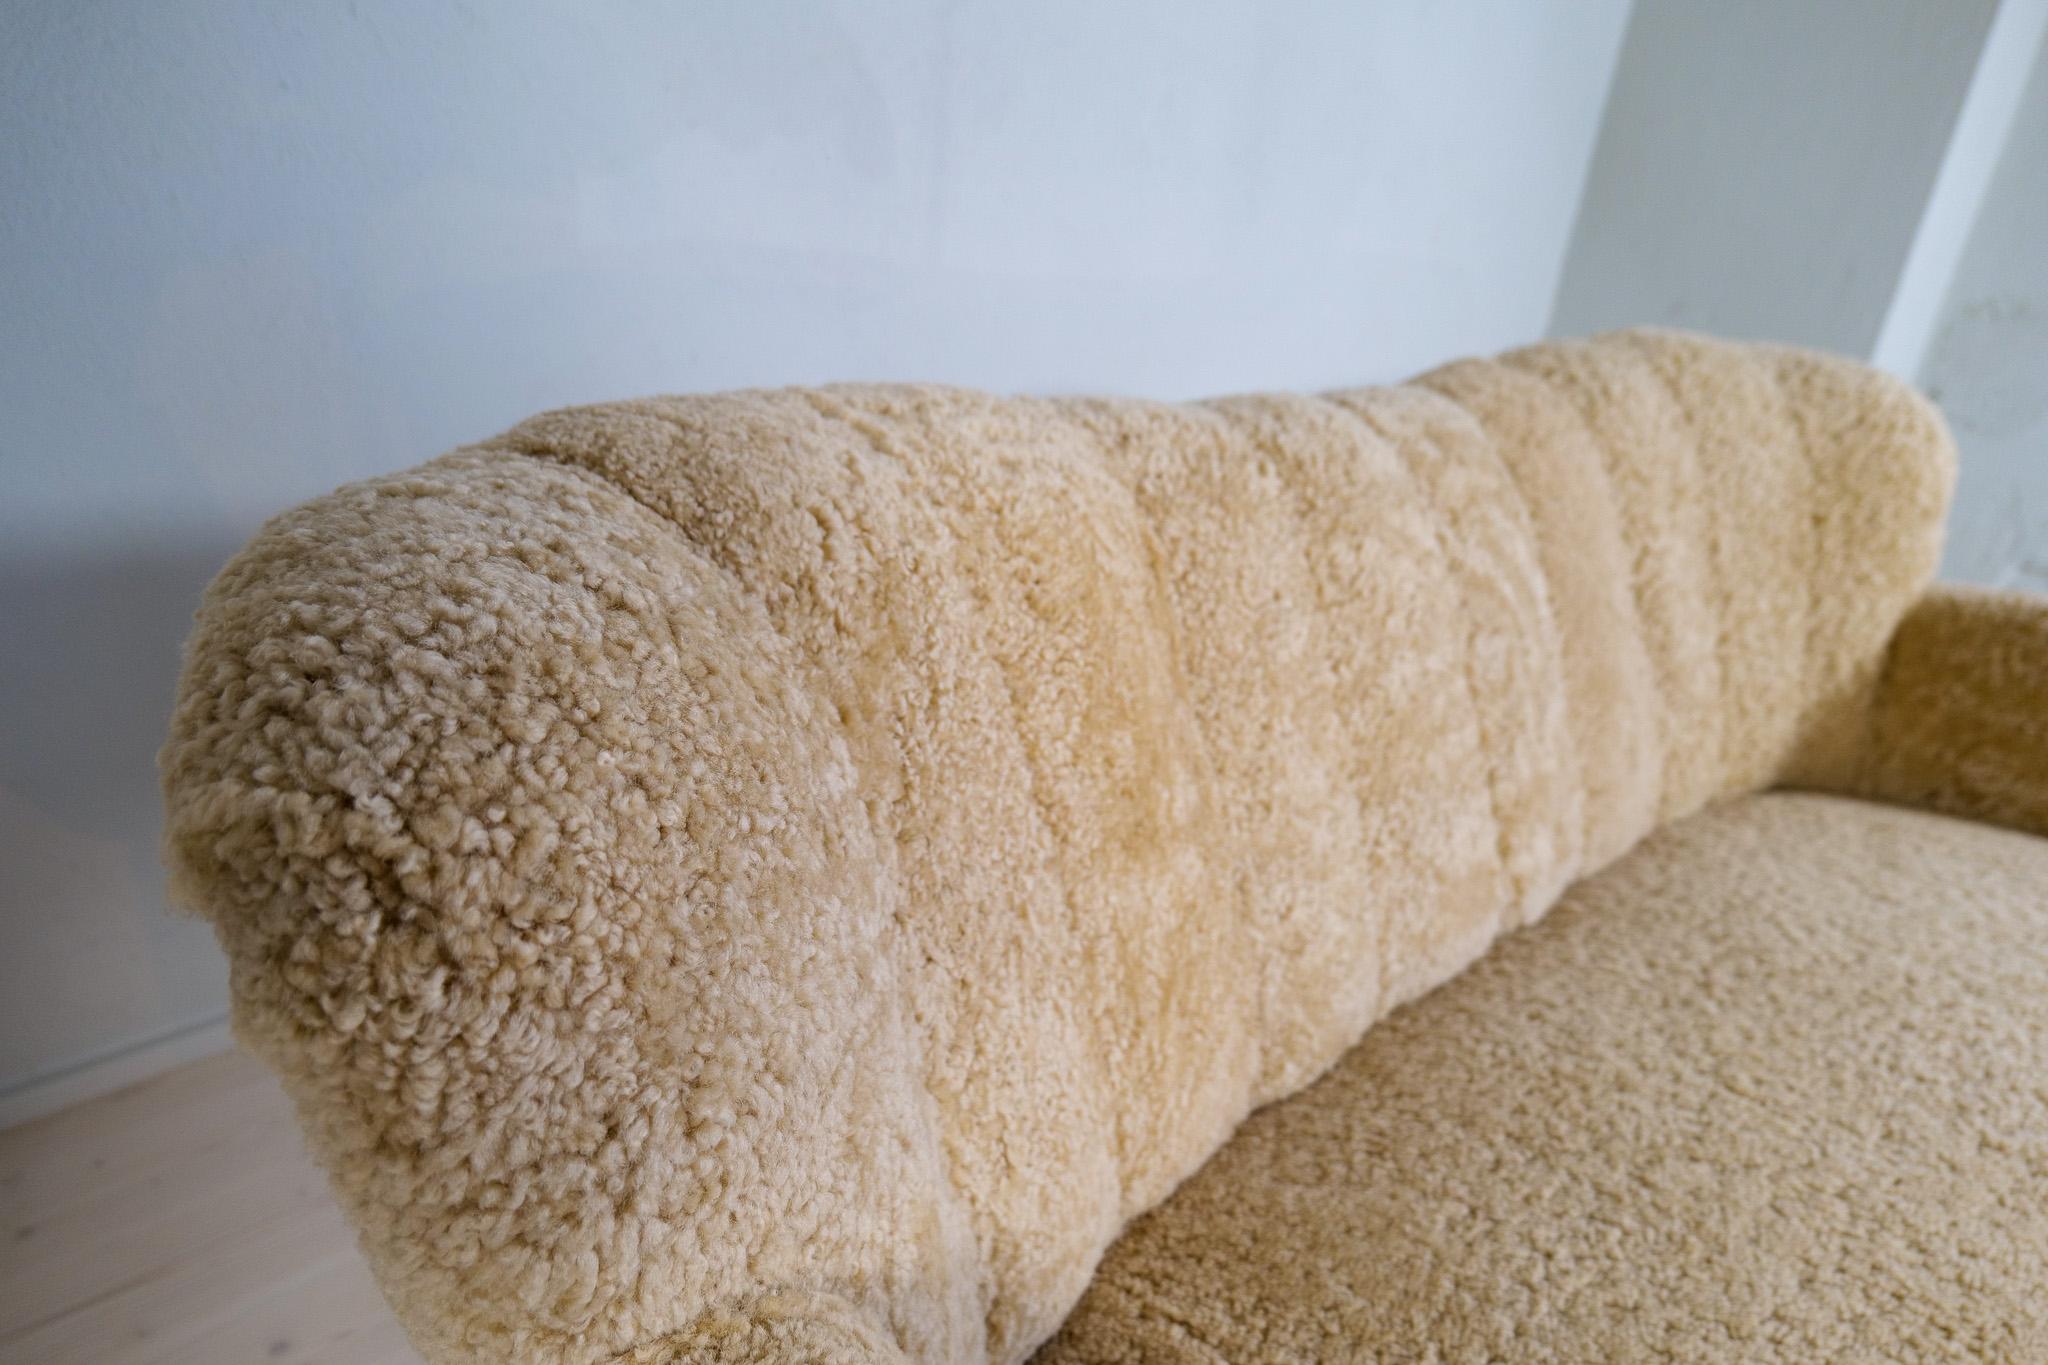 Midcentury Sculptrual Sheepskin/Shearling Sofa in Manors of Marta Blomstedt 9